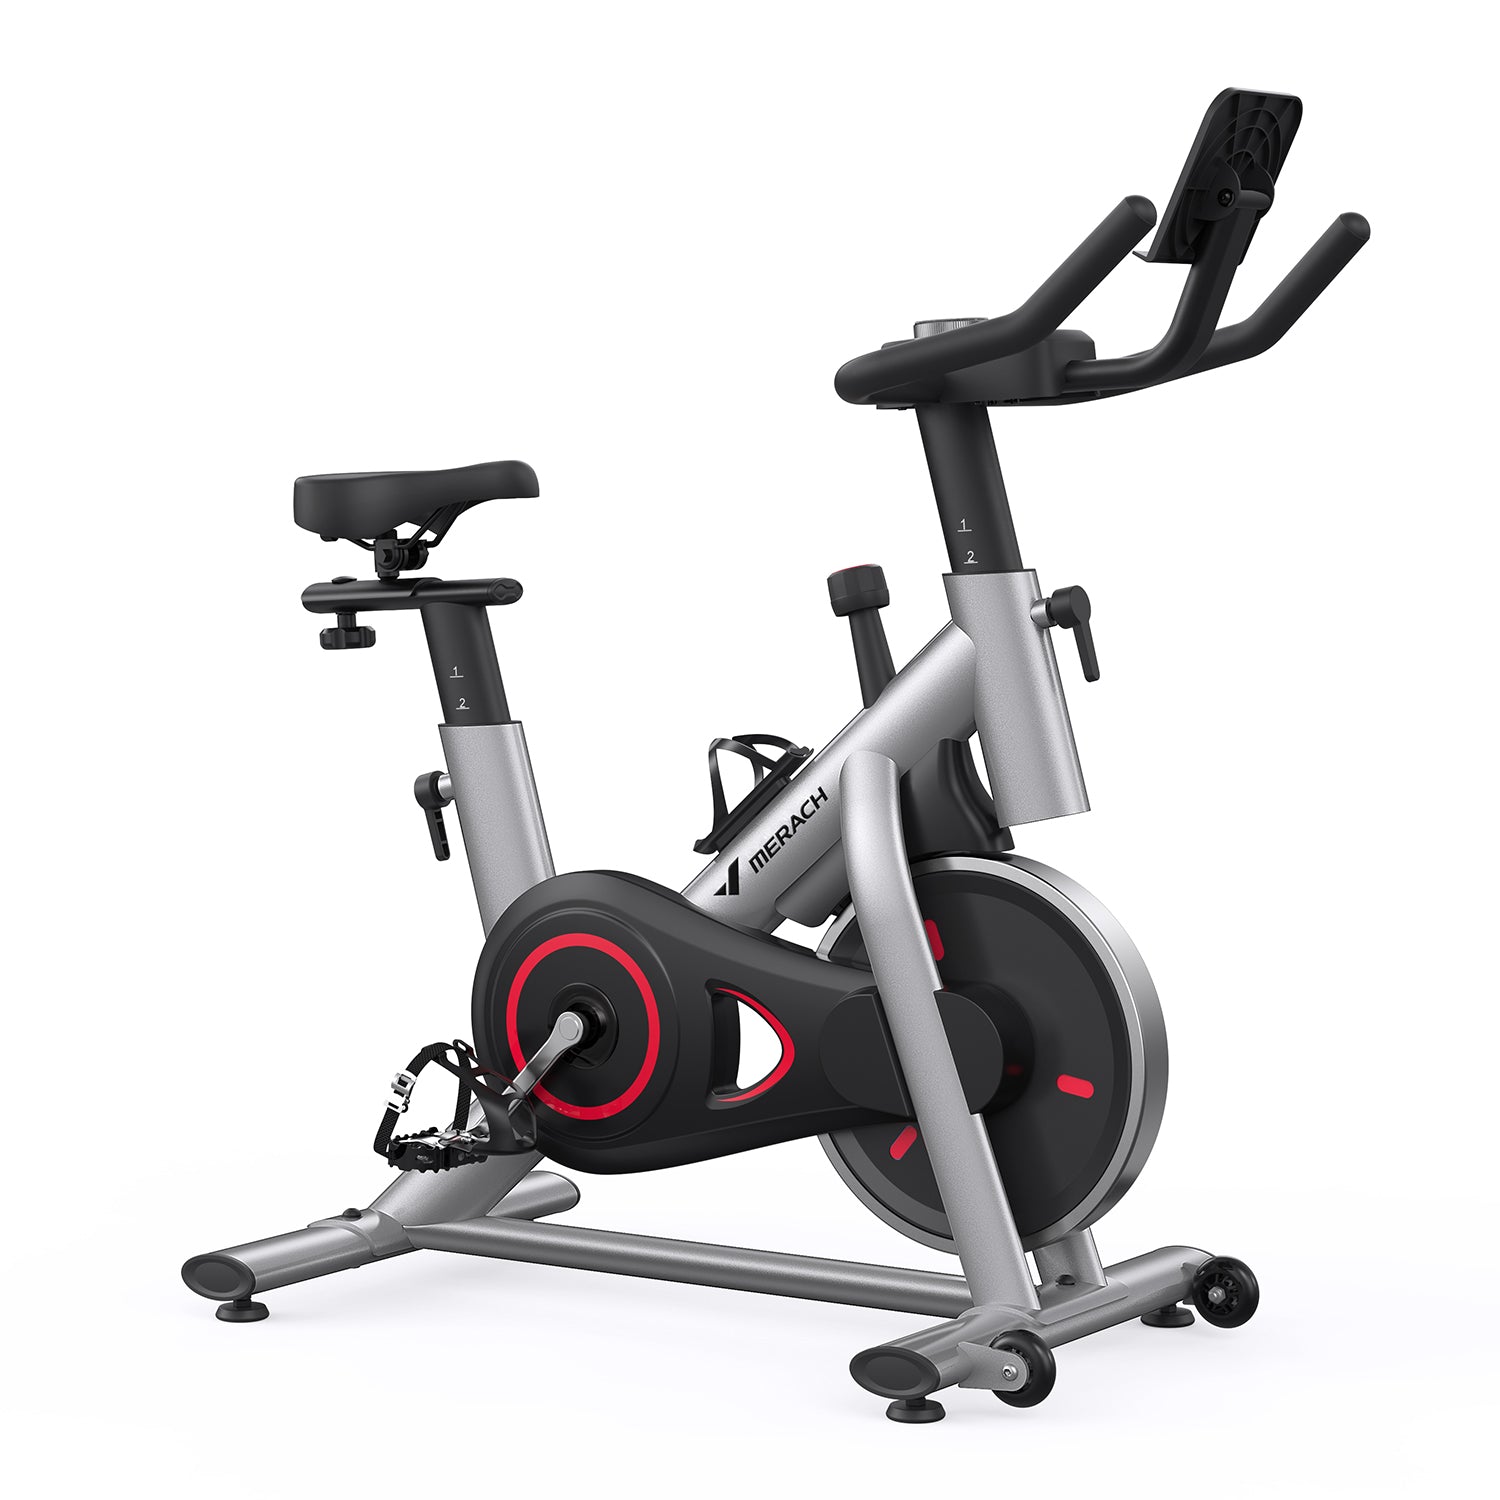 MERACH S26 Grey Cardio Workout Exercise Bike for Home